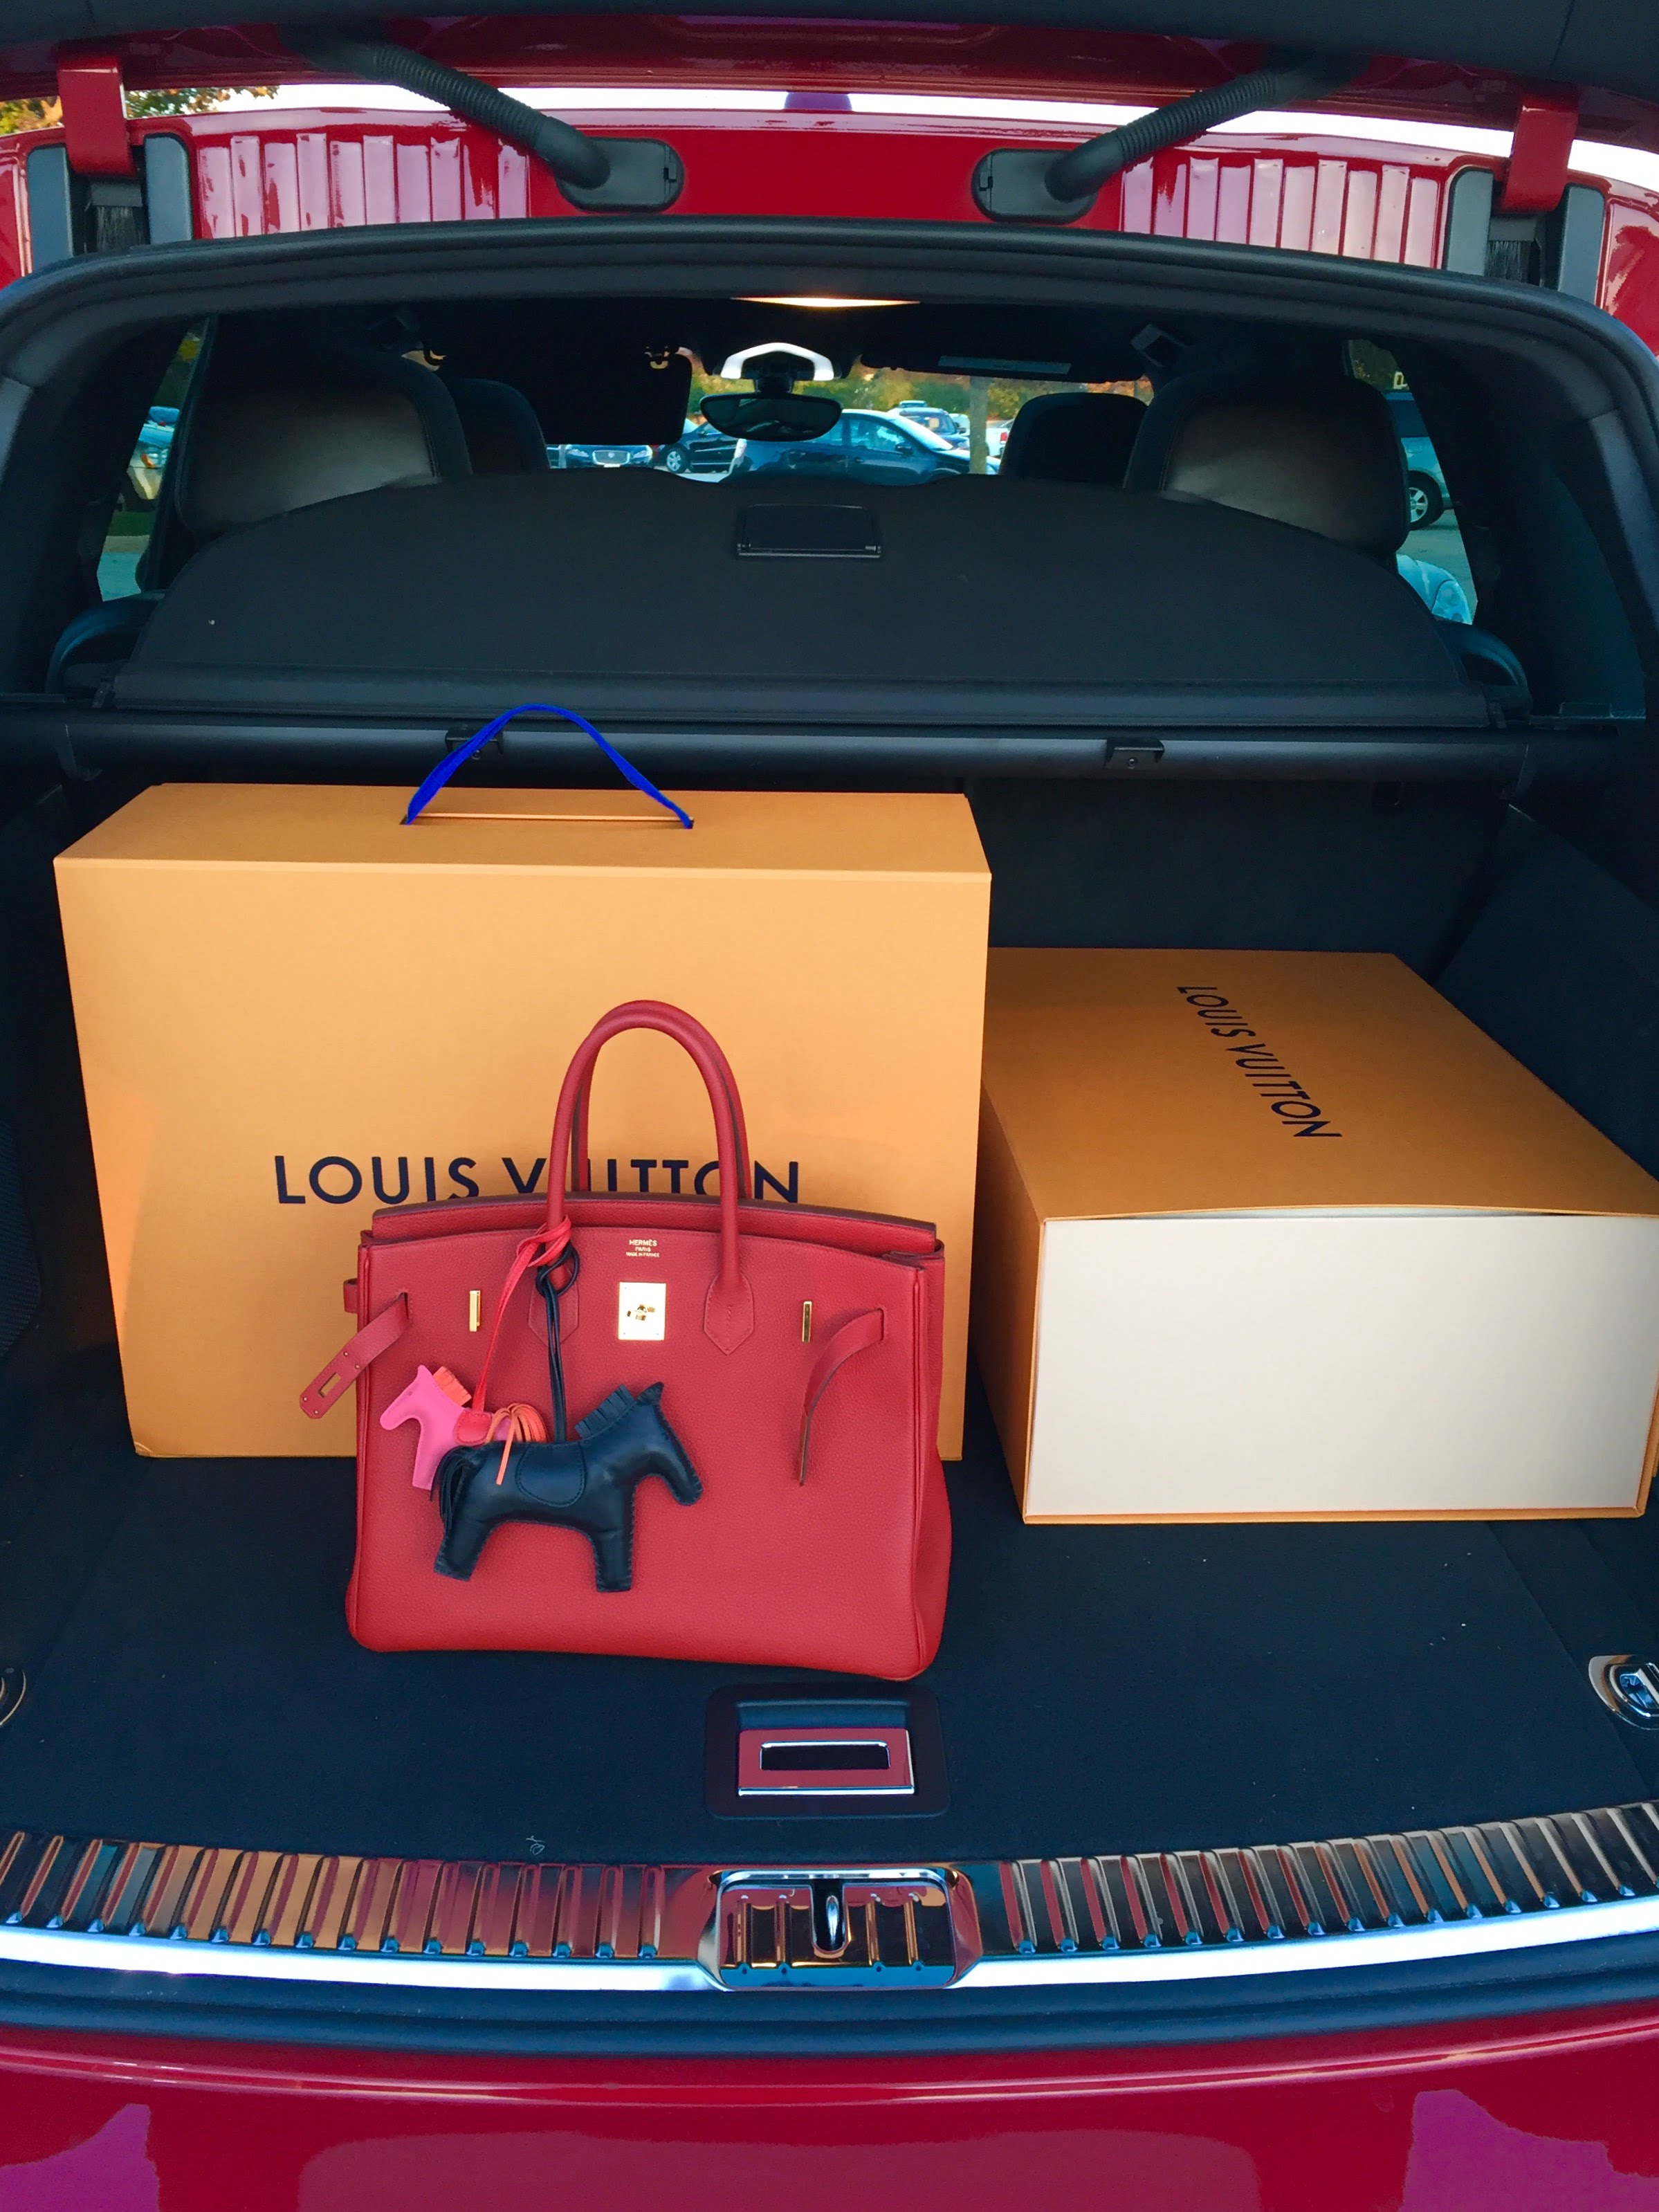 Travel In Style With Louis Vuitton's Horizon Rolling Luggage - BAGAHOLICBOY